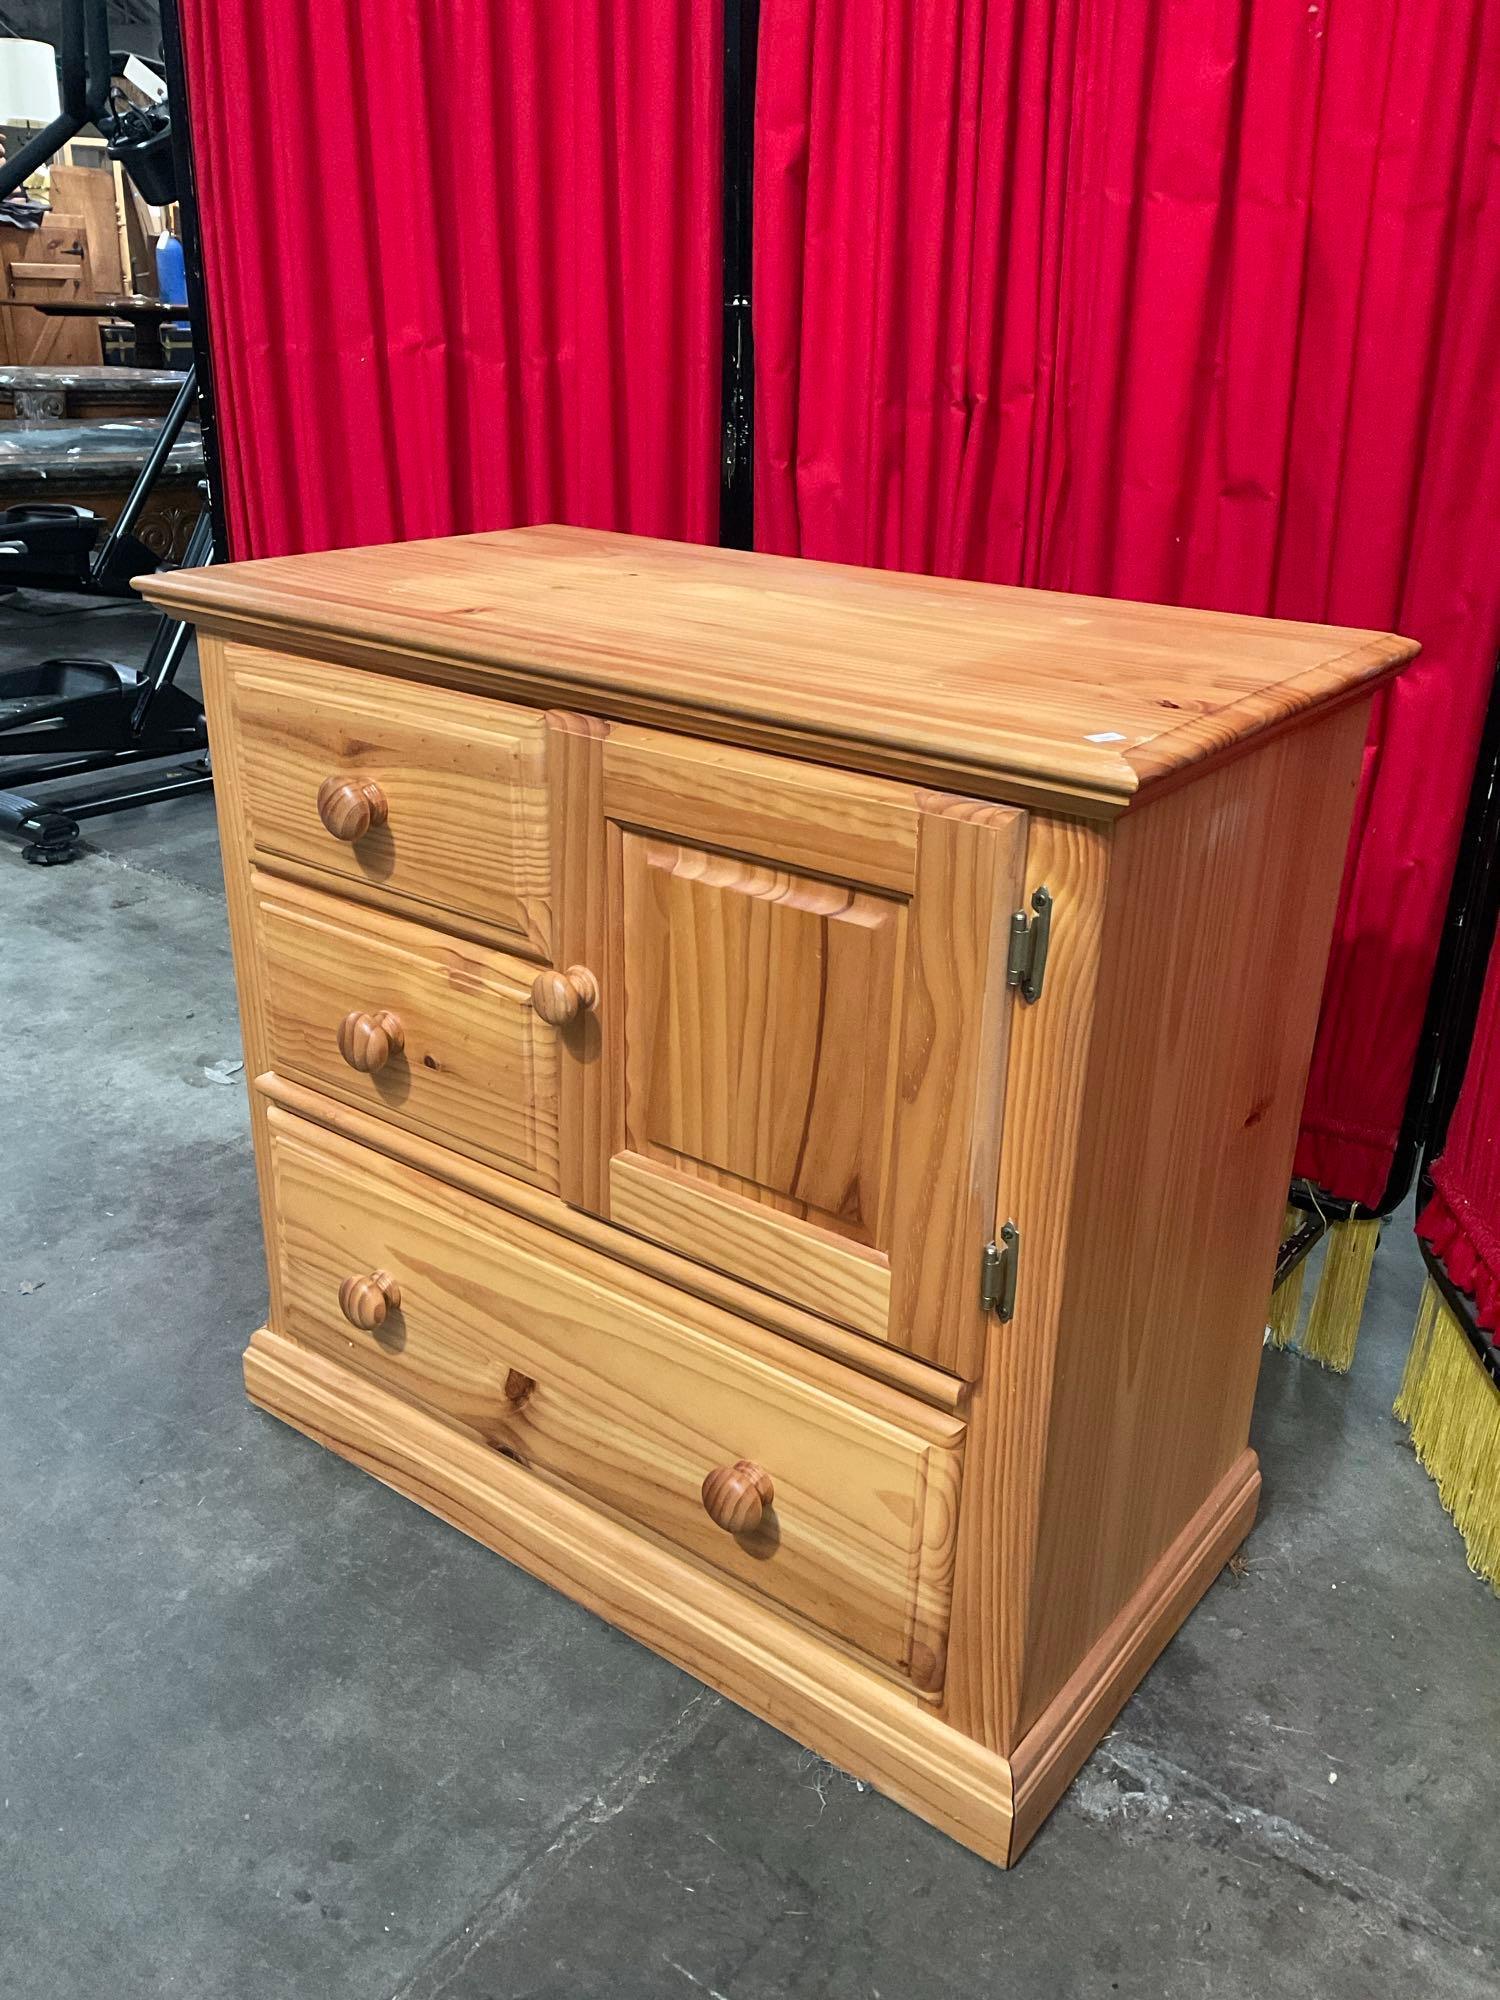 Contemporary Maywood Furniture Co. Wooden Side Cabinet w/ 3 Drawers & 1 Cupboard. See pics.